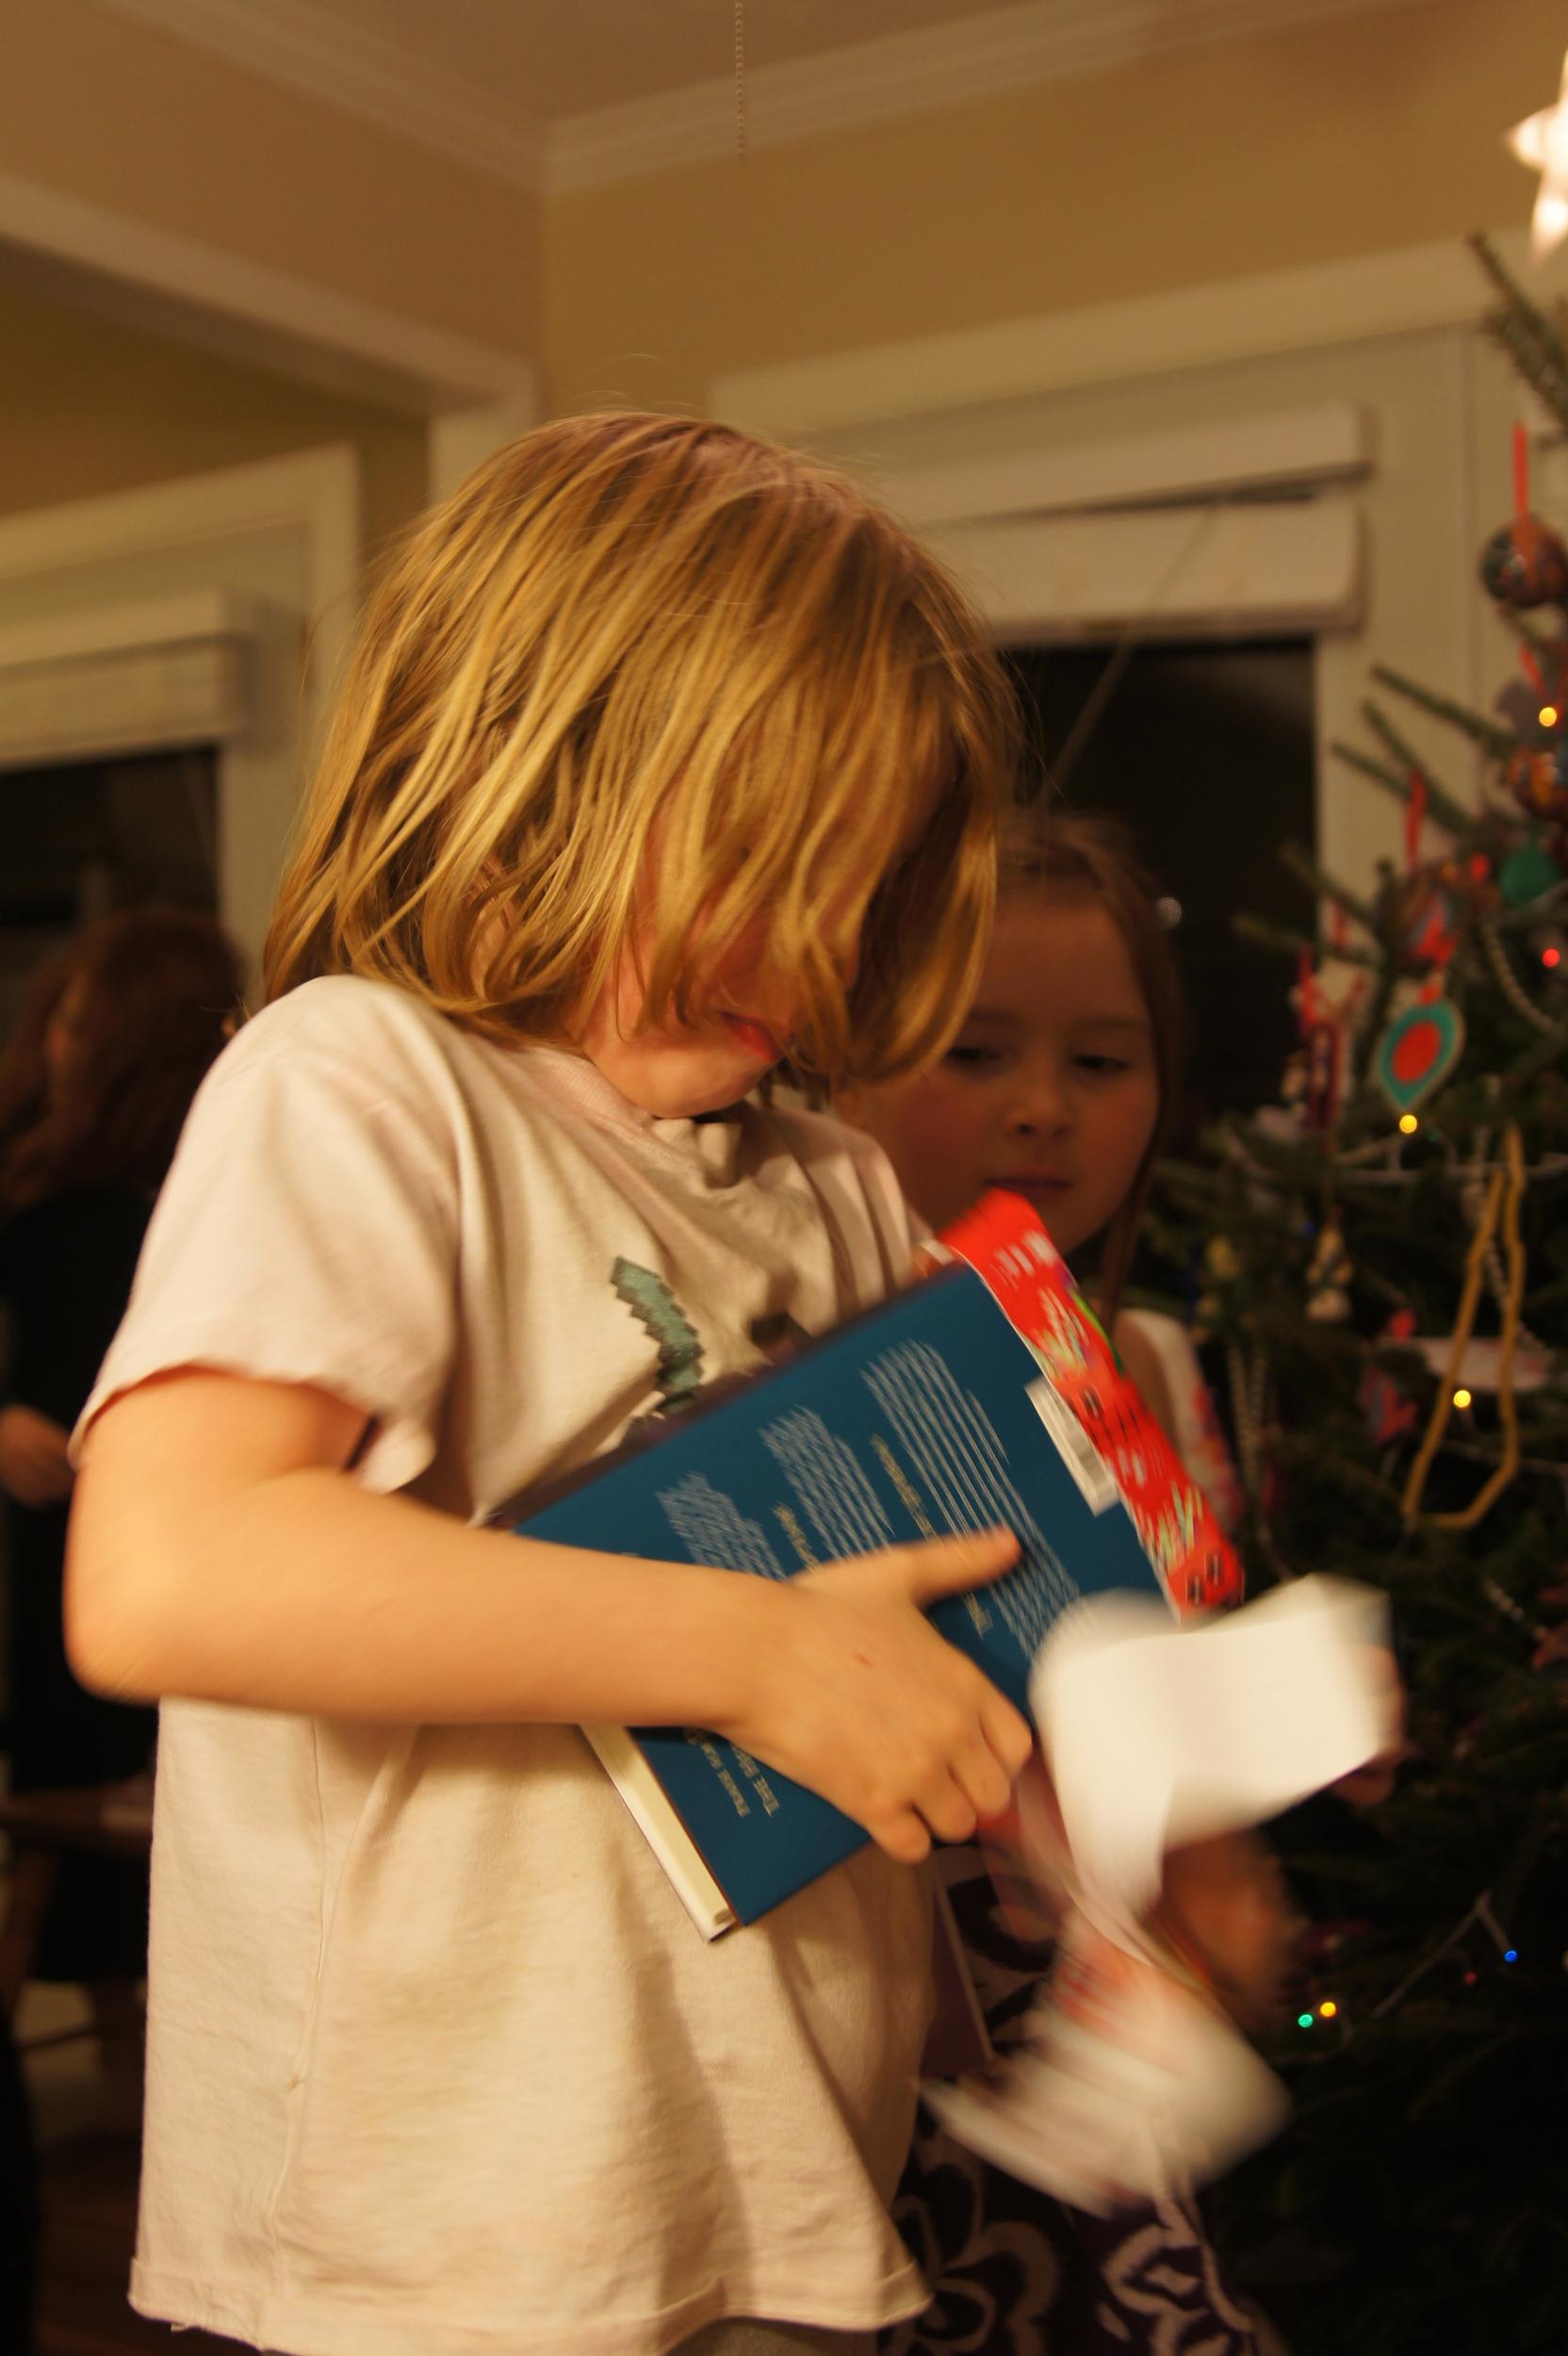 Unwrapping the gifts